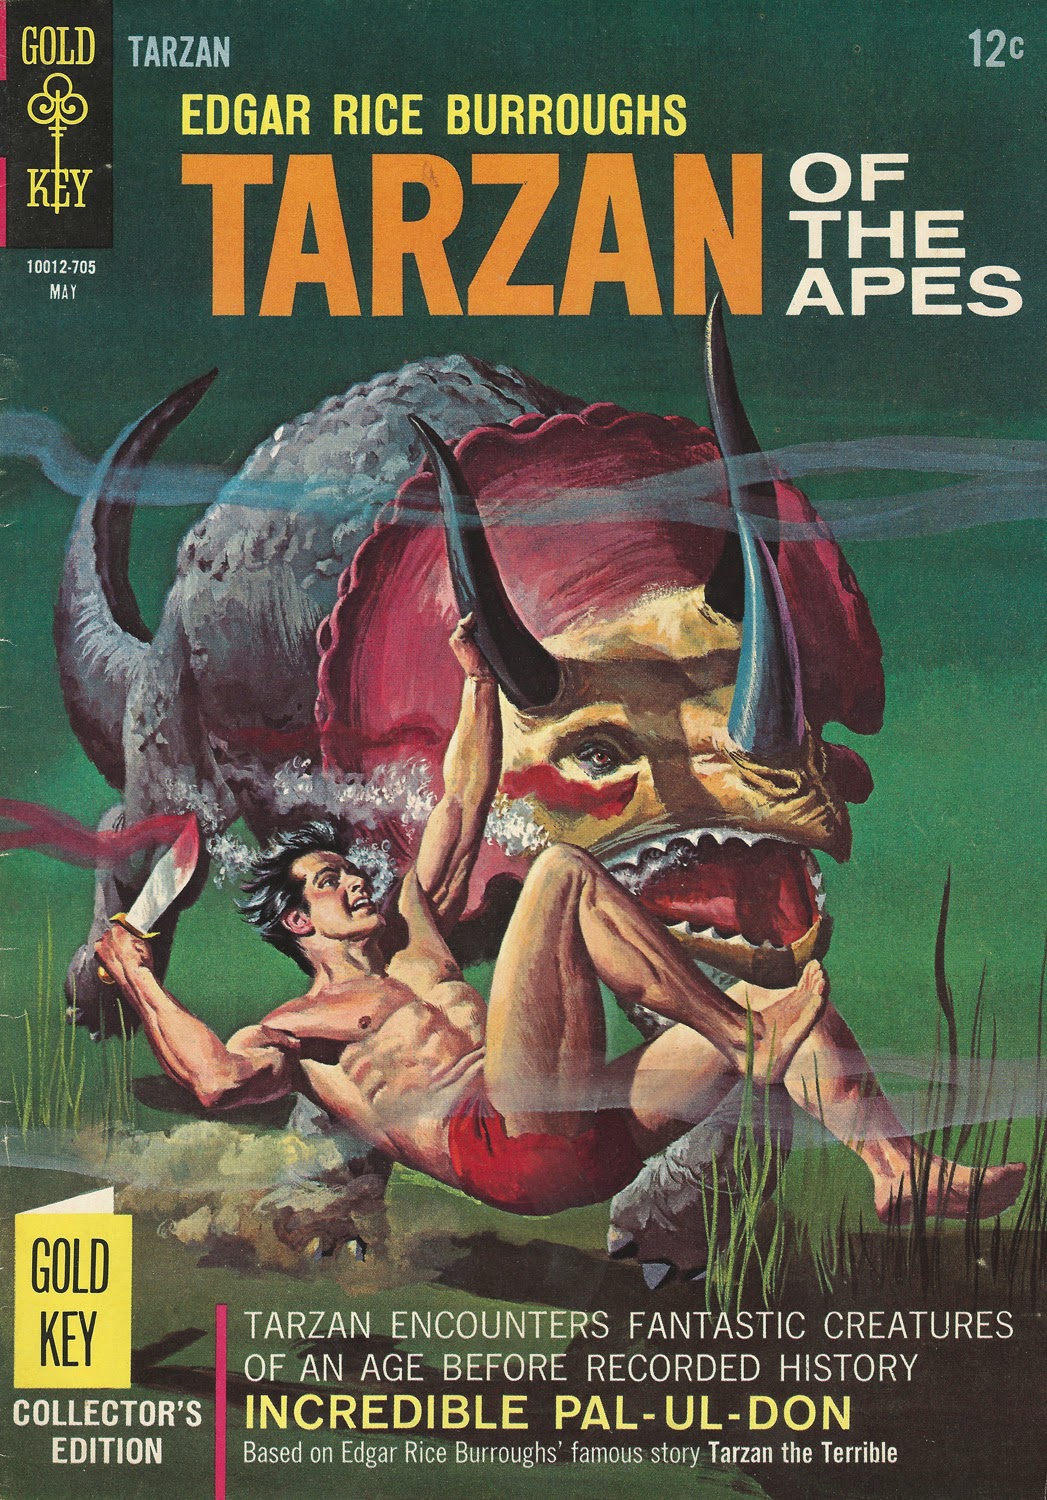 http://pulpcovers.com/incredible-pal-ul-don/